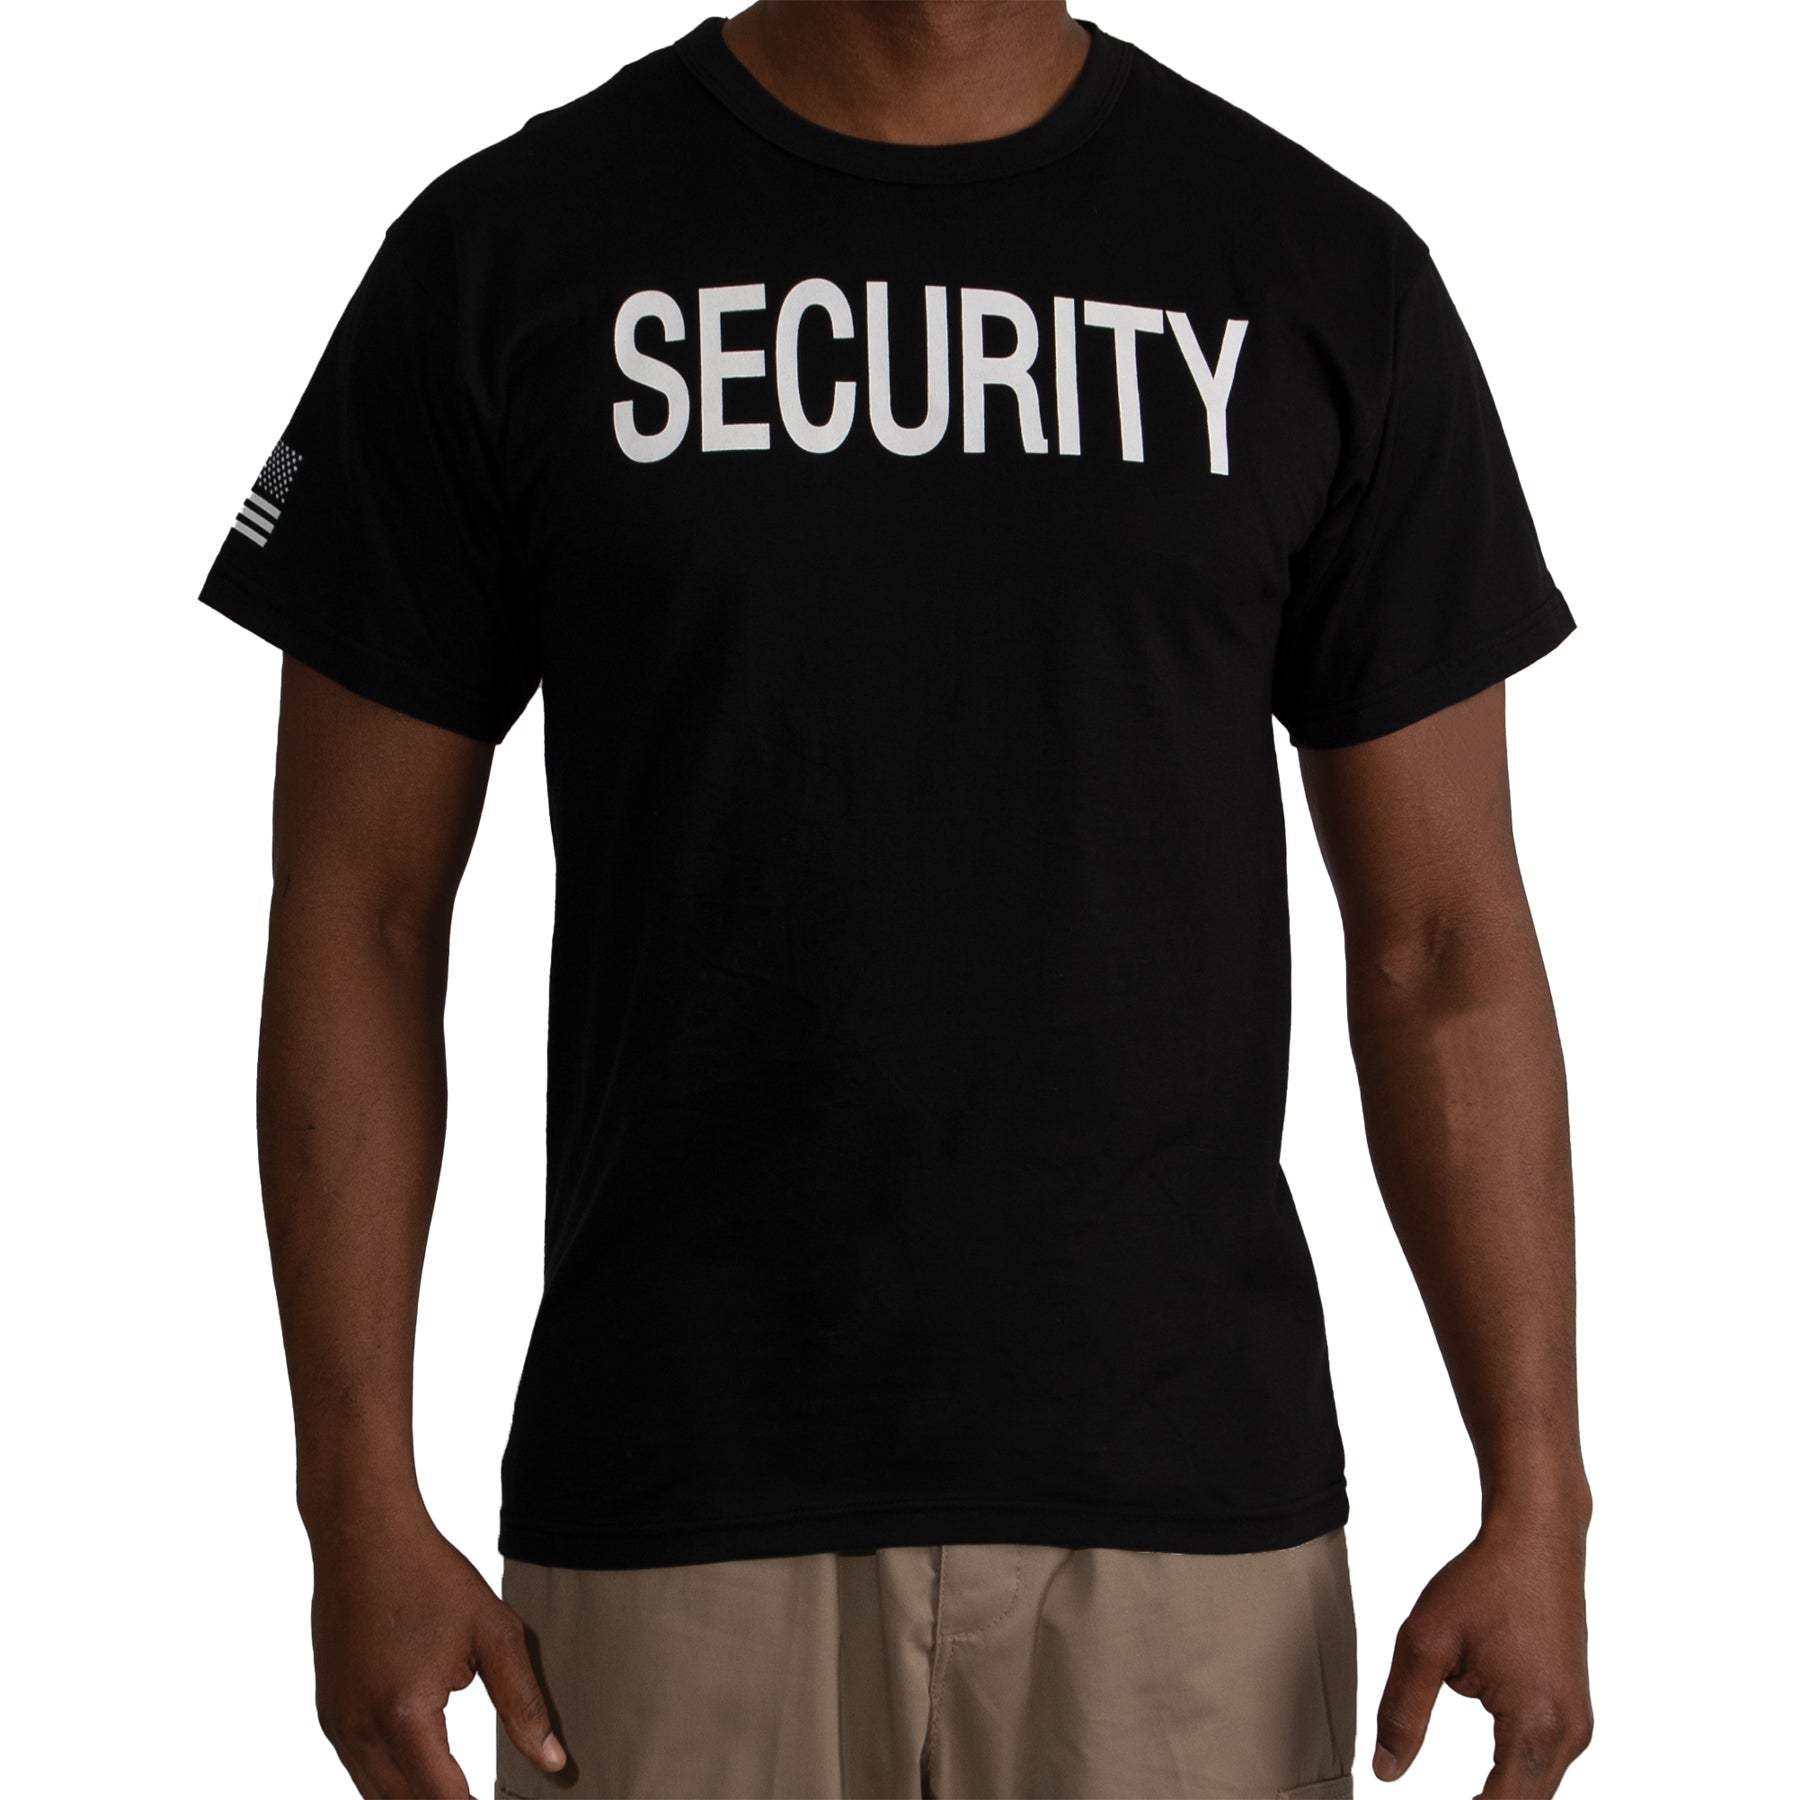 [Public Safety] Poly/Cotton 2-Sided Security & Flag T-Shirts Security White - Black